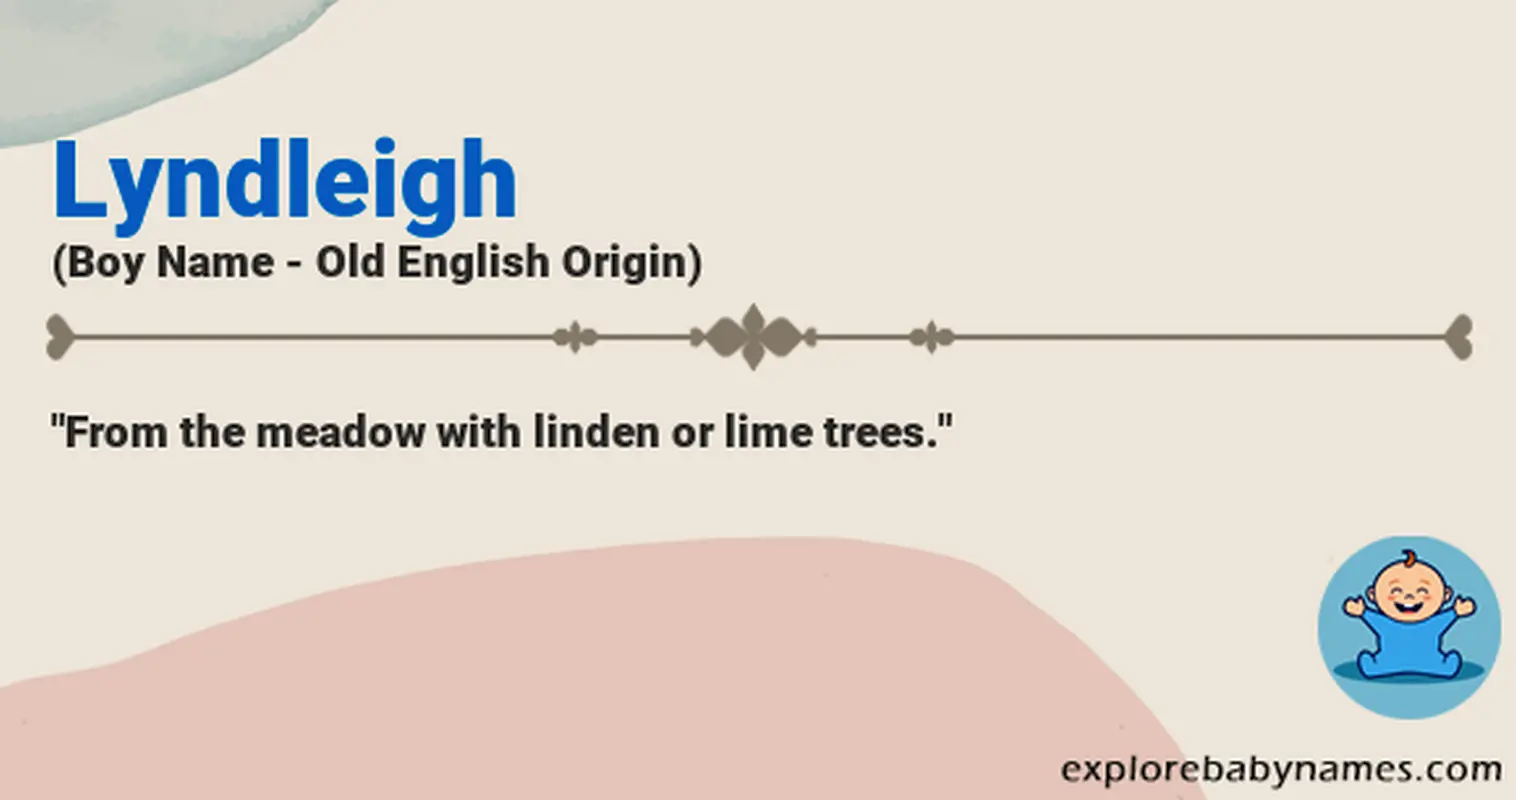 Meaning of Lyndleigh